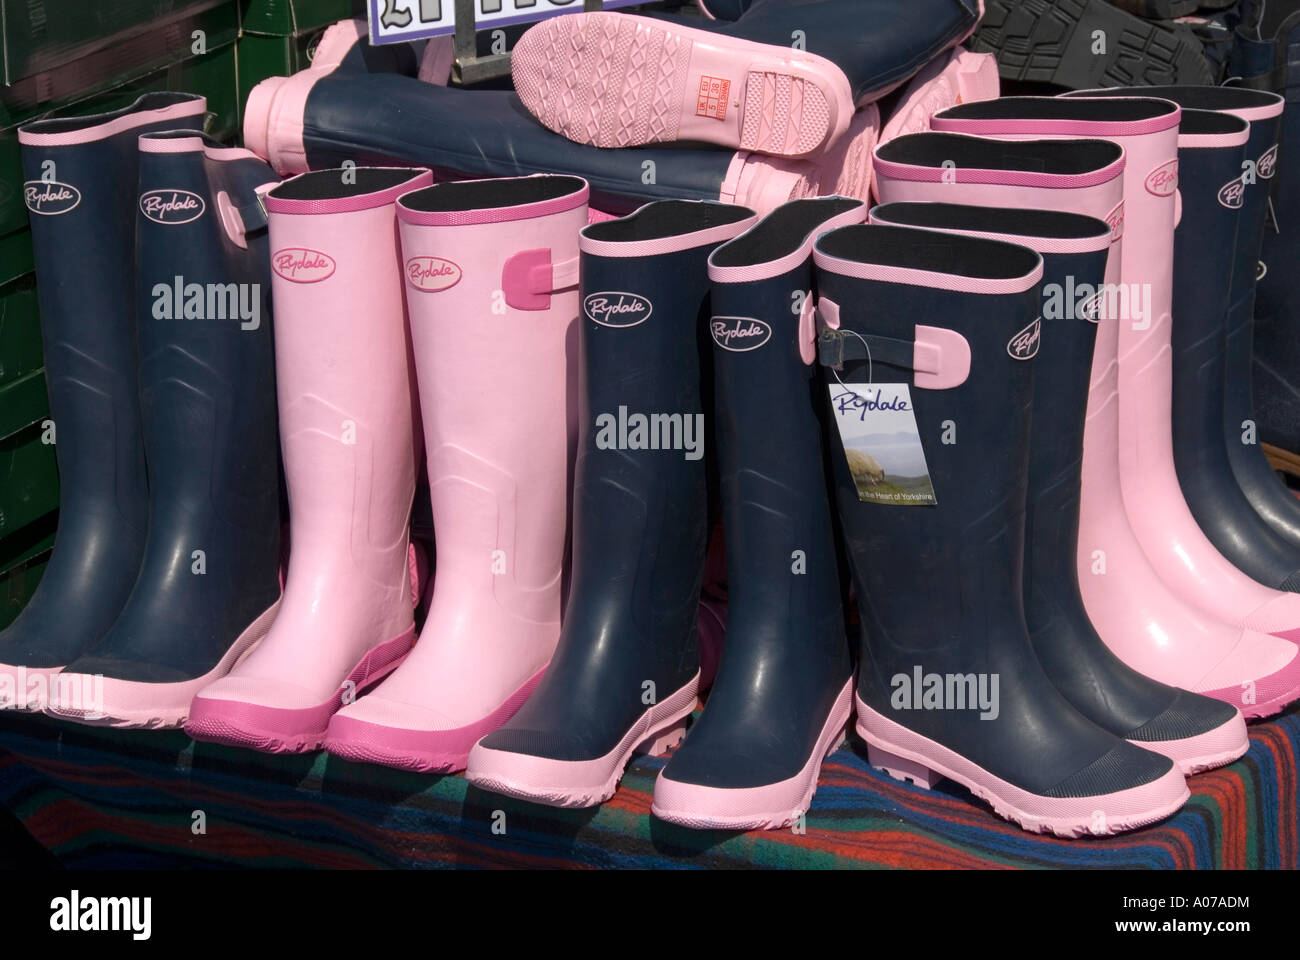 Wellington boots stacked on stand for 